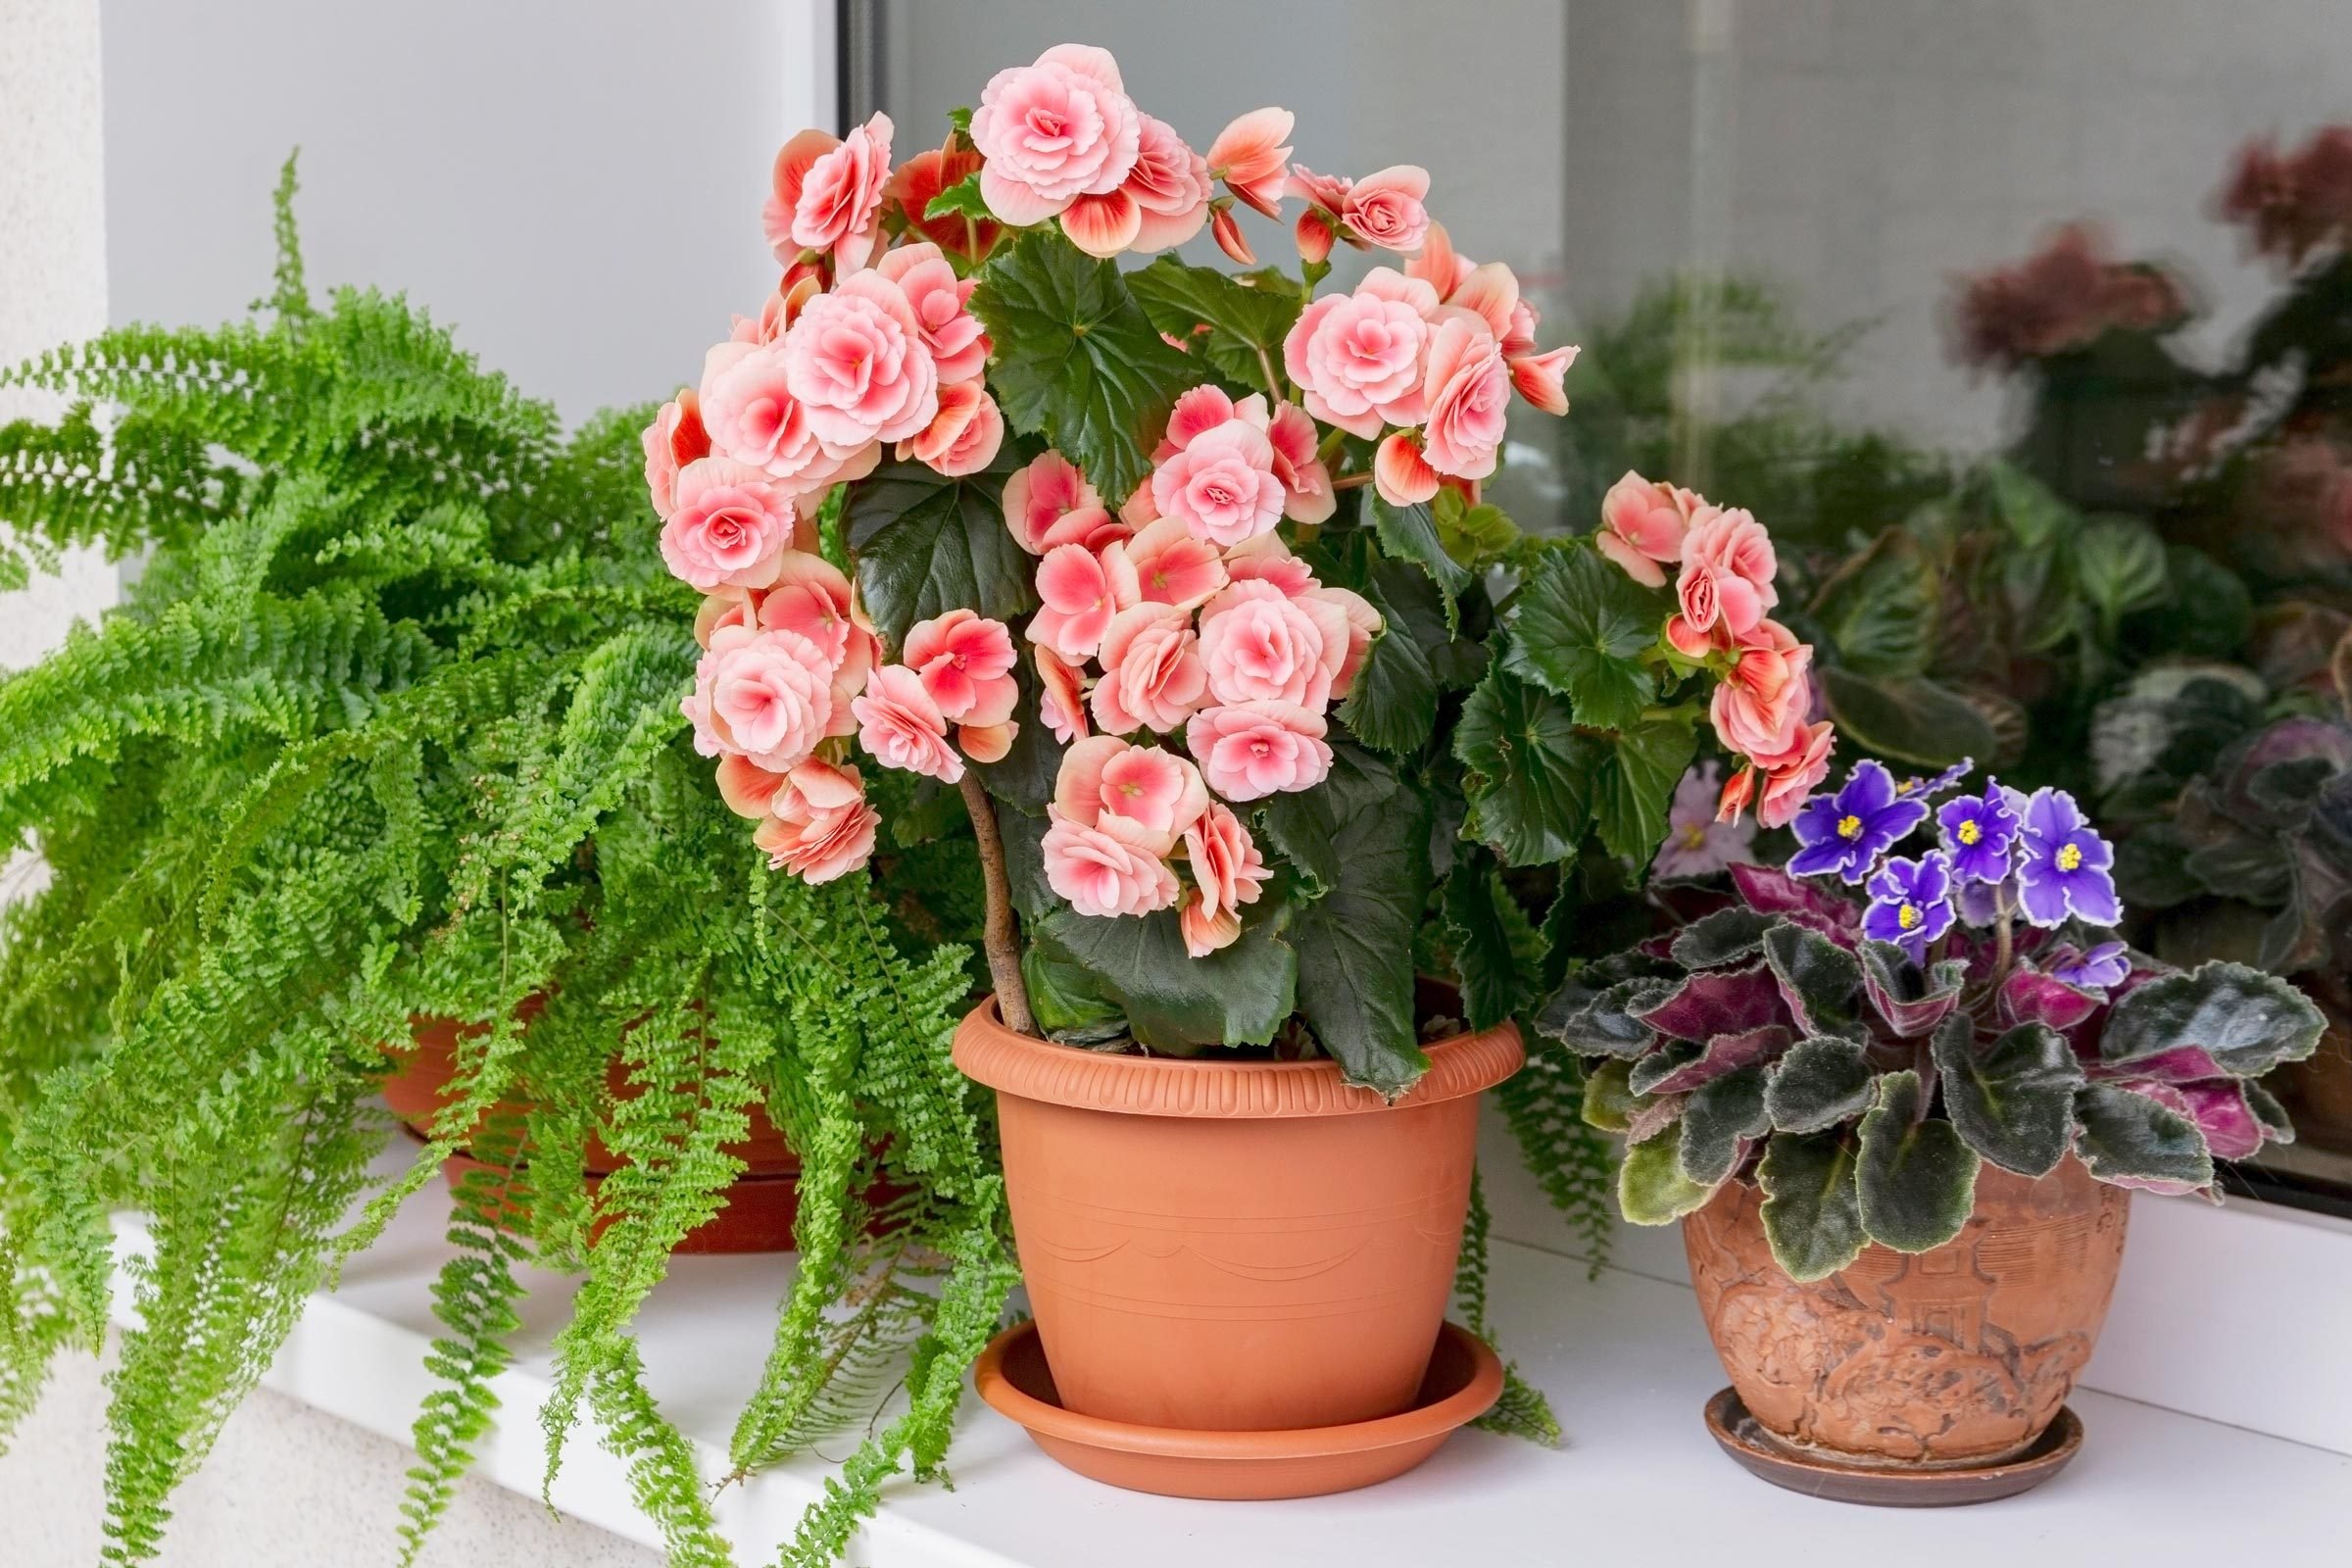 20 Flowering Houseplants That Will Add Beauty to Your Home - Bob Vila